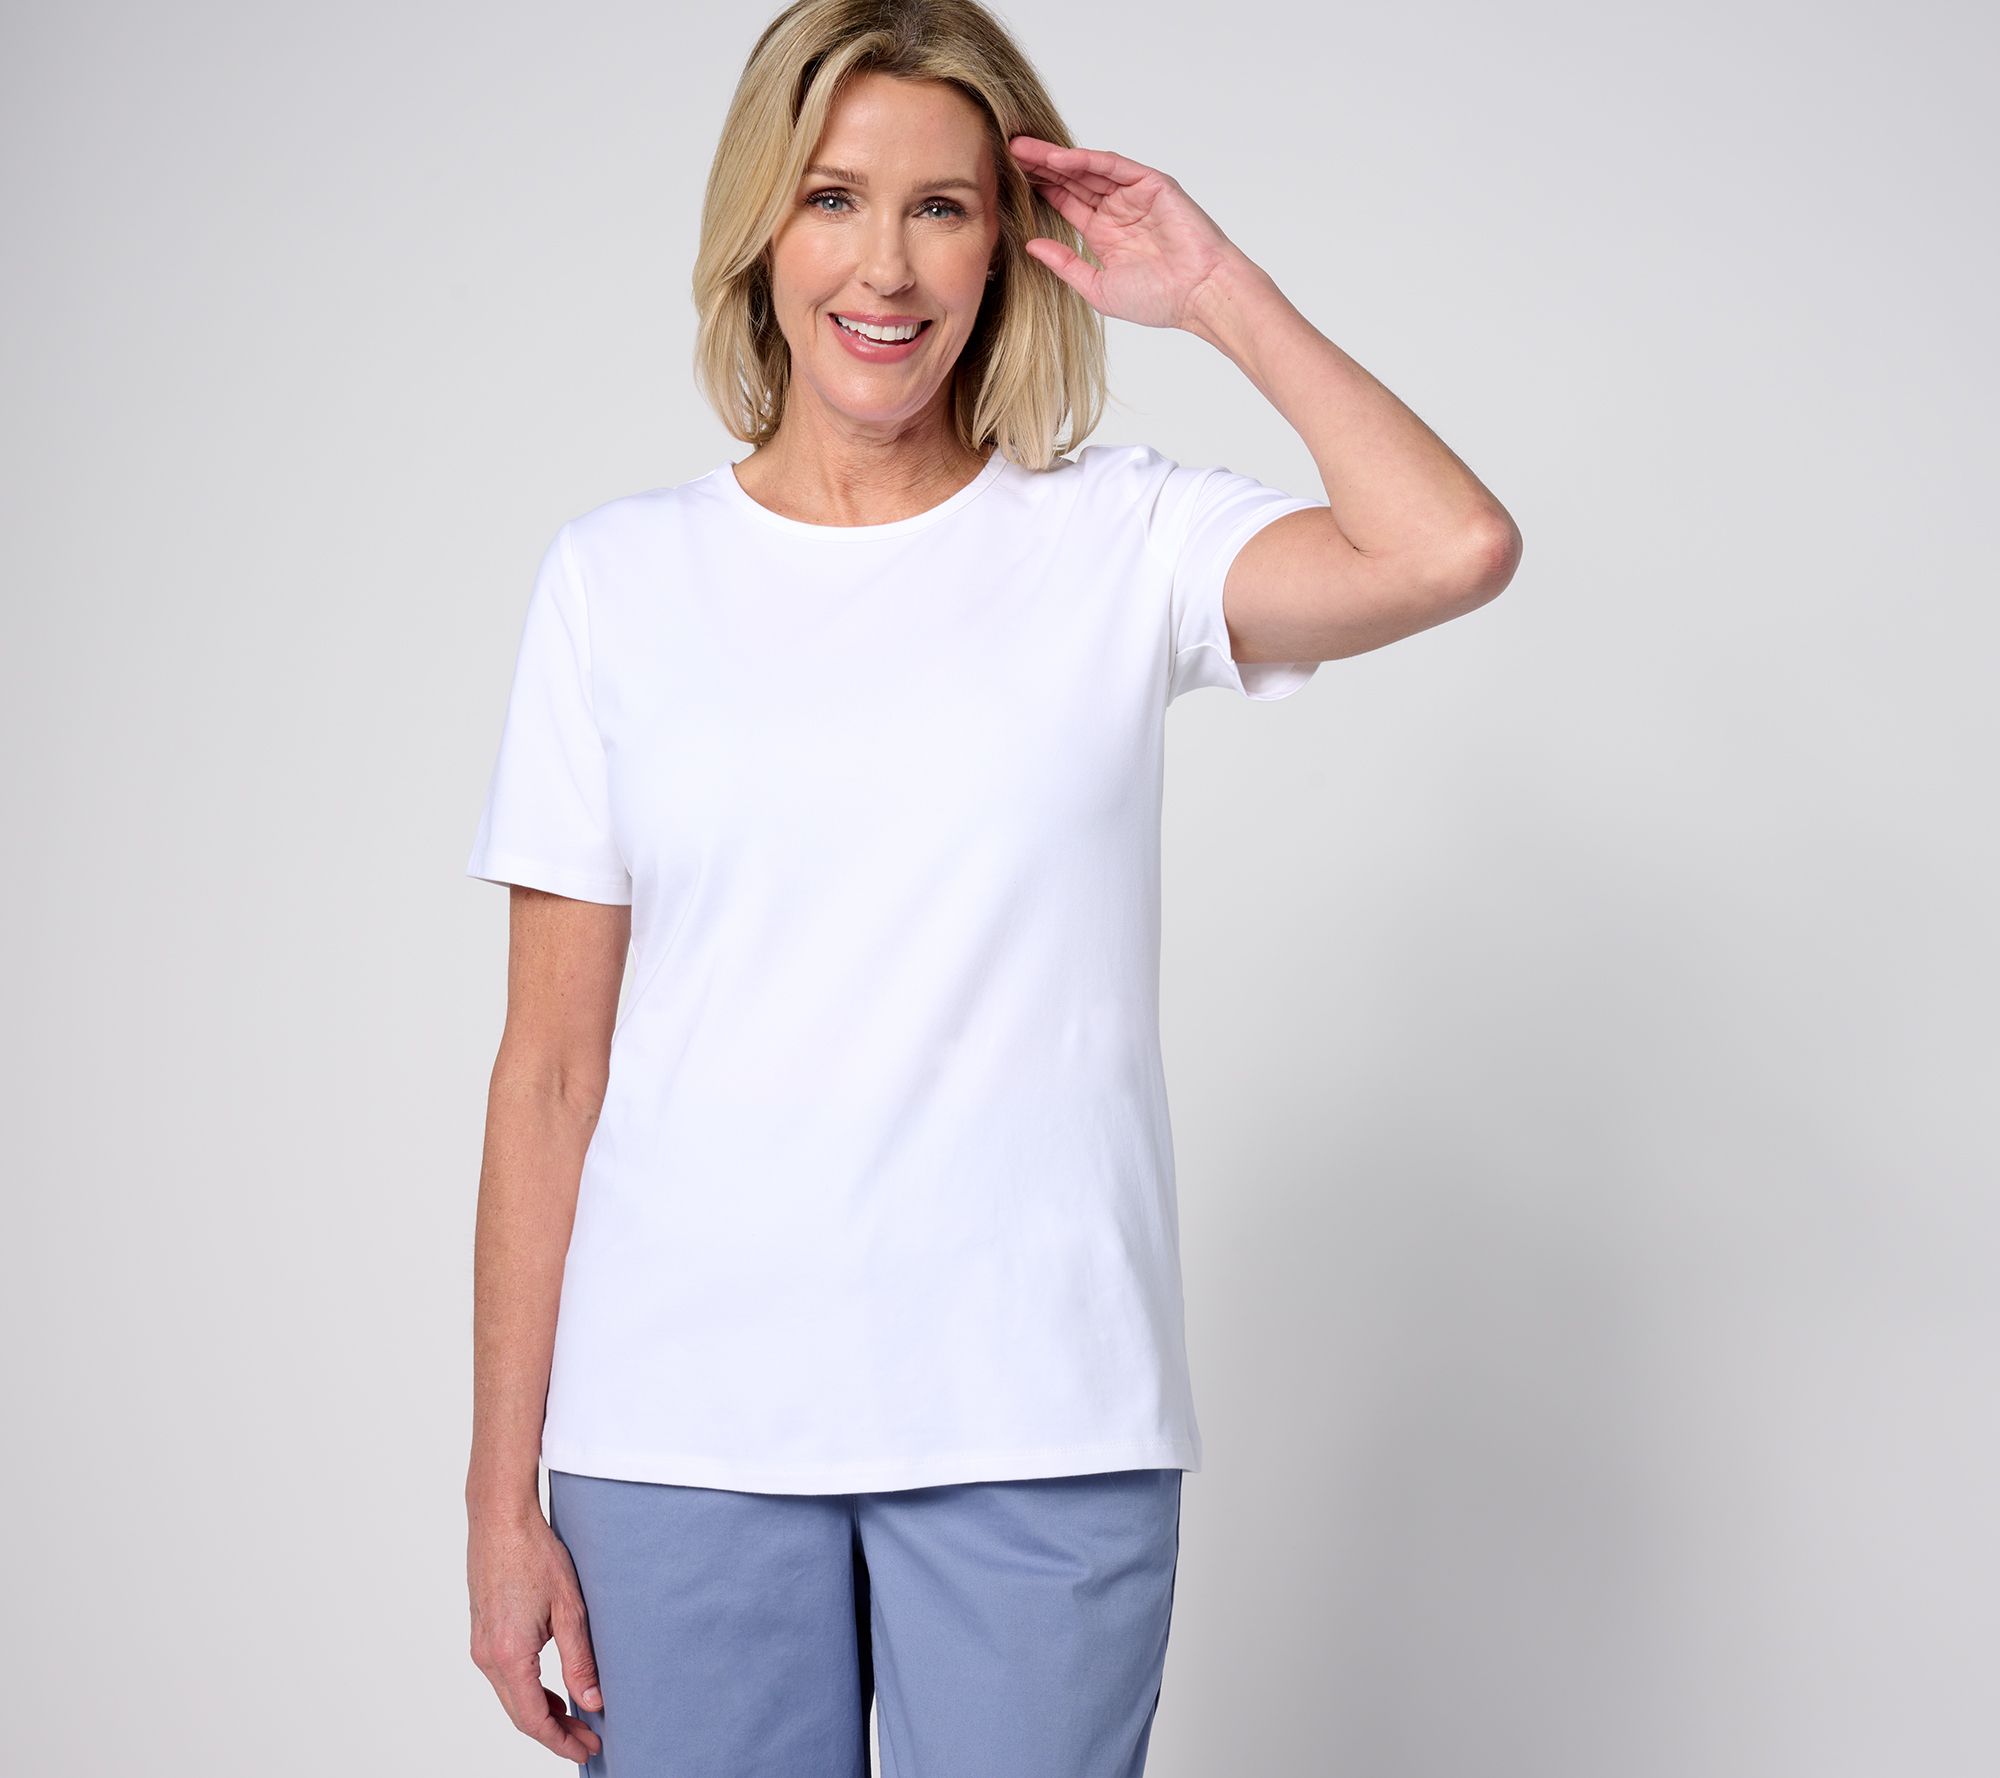 How to Style Short Sleeve Rayon Tops, Blog